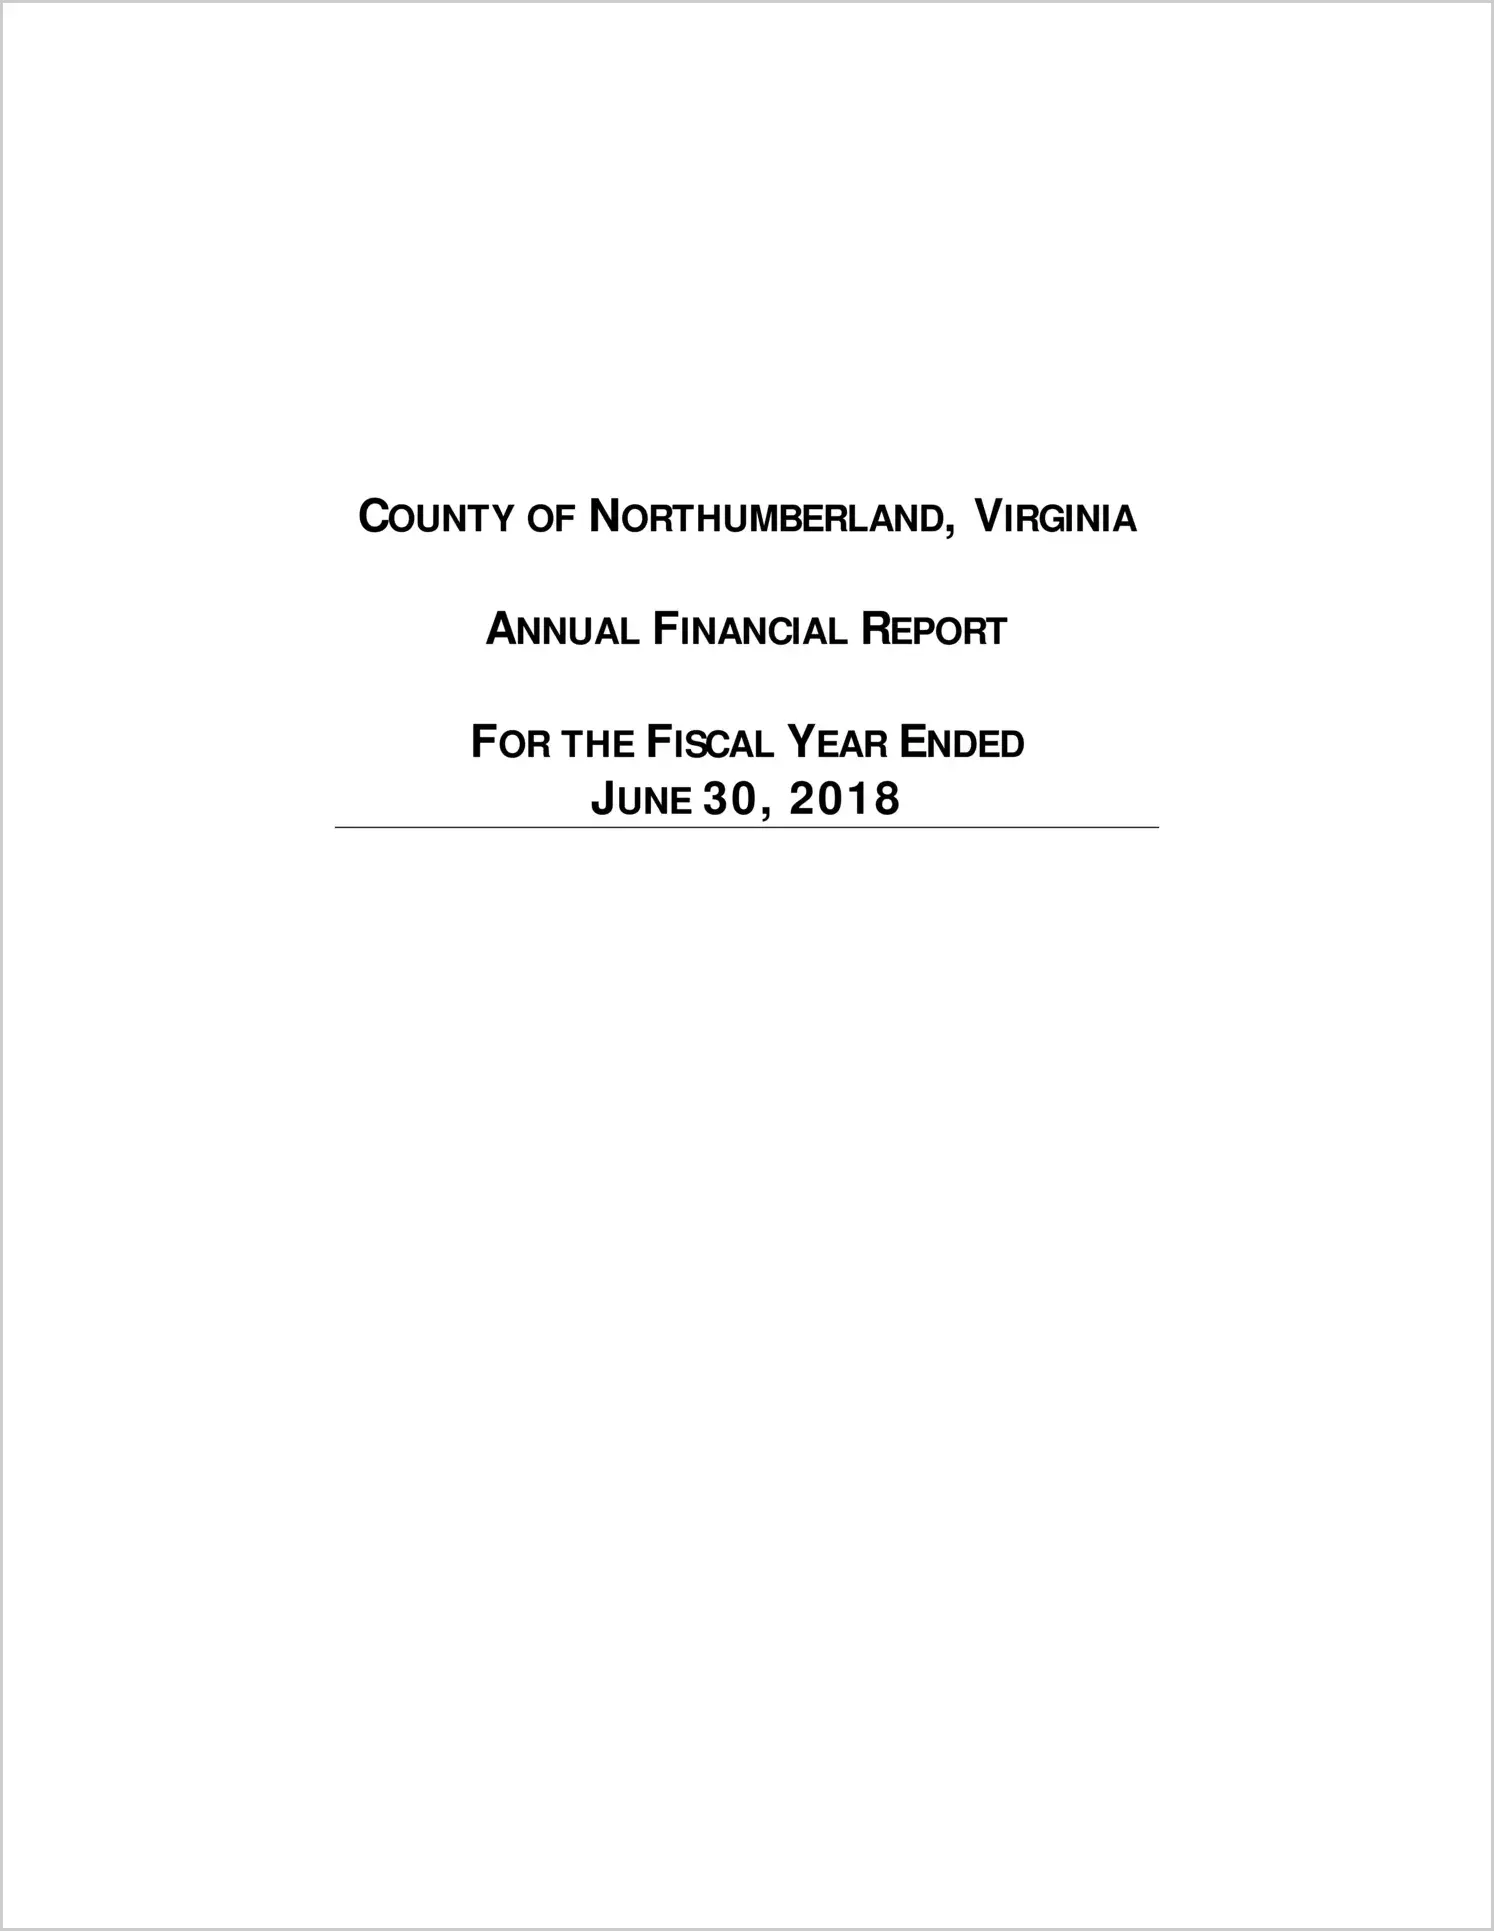 2018 Annual Financial Report for County of Northumberland